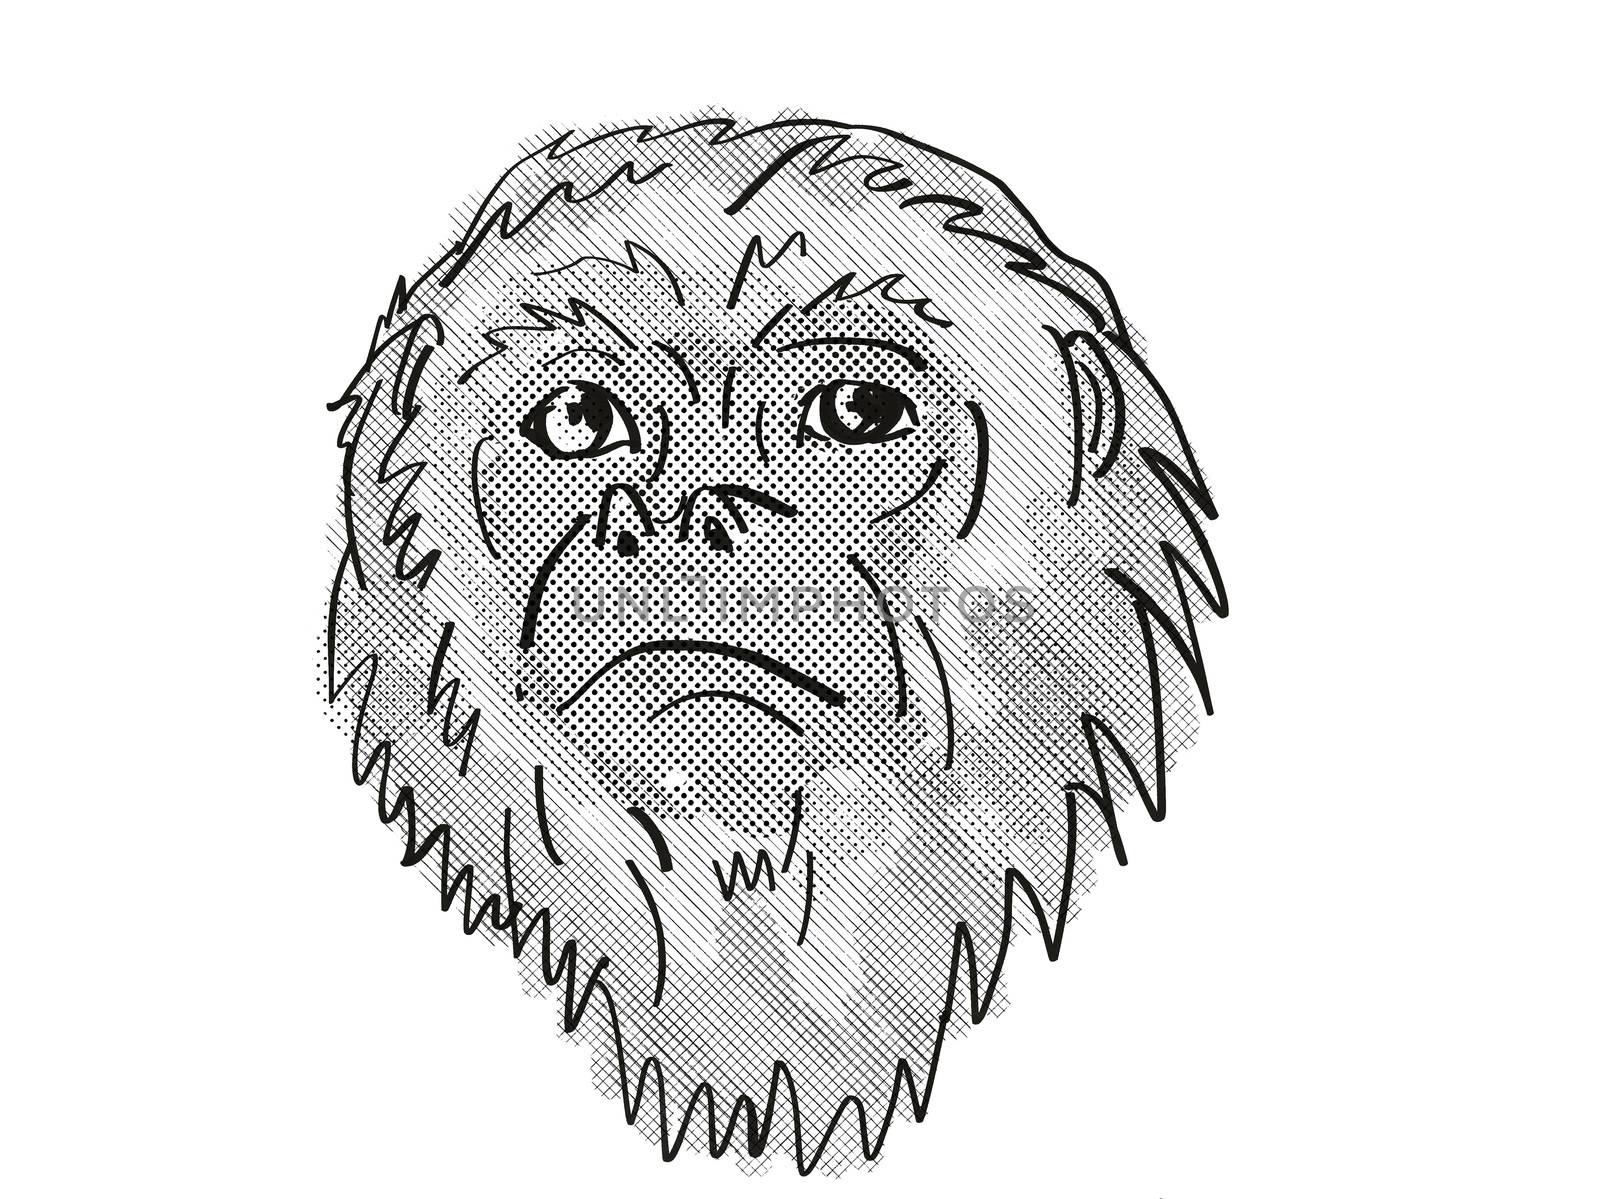 Retro cartoon style drawing head of a Yucatan Black Howler Monkey, a primate species viewed from front on isolated white background done in black and white